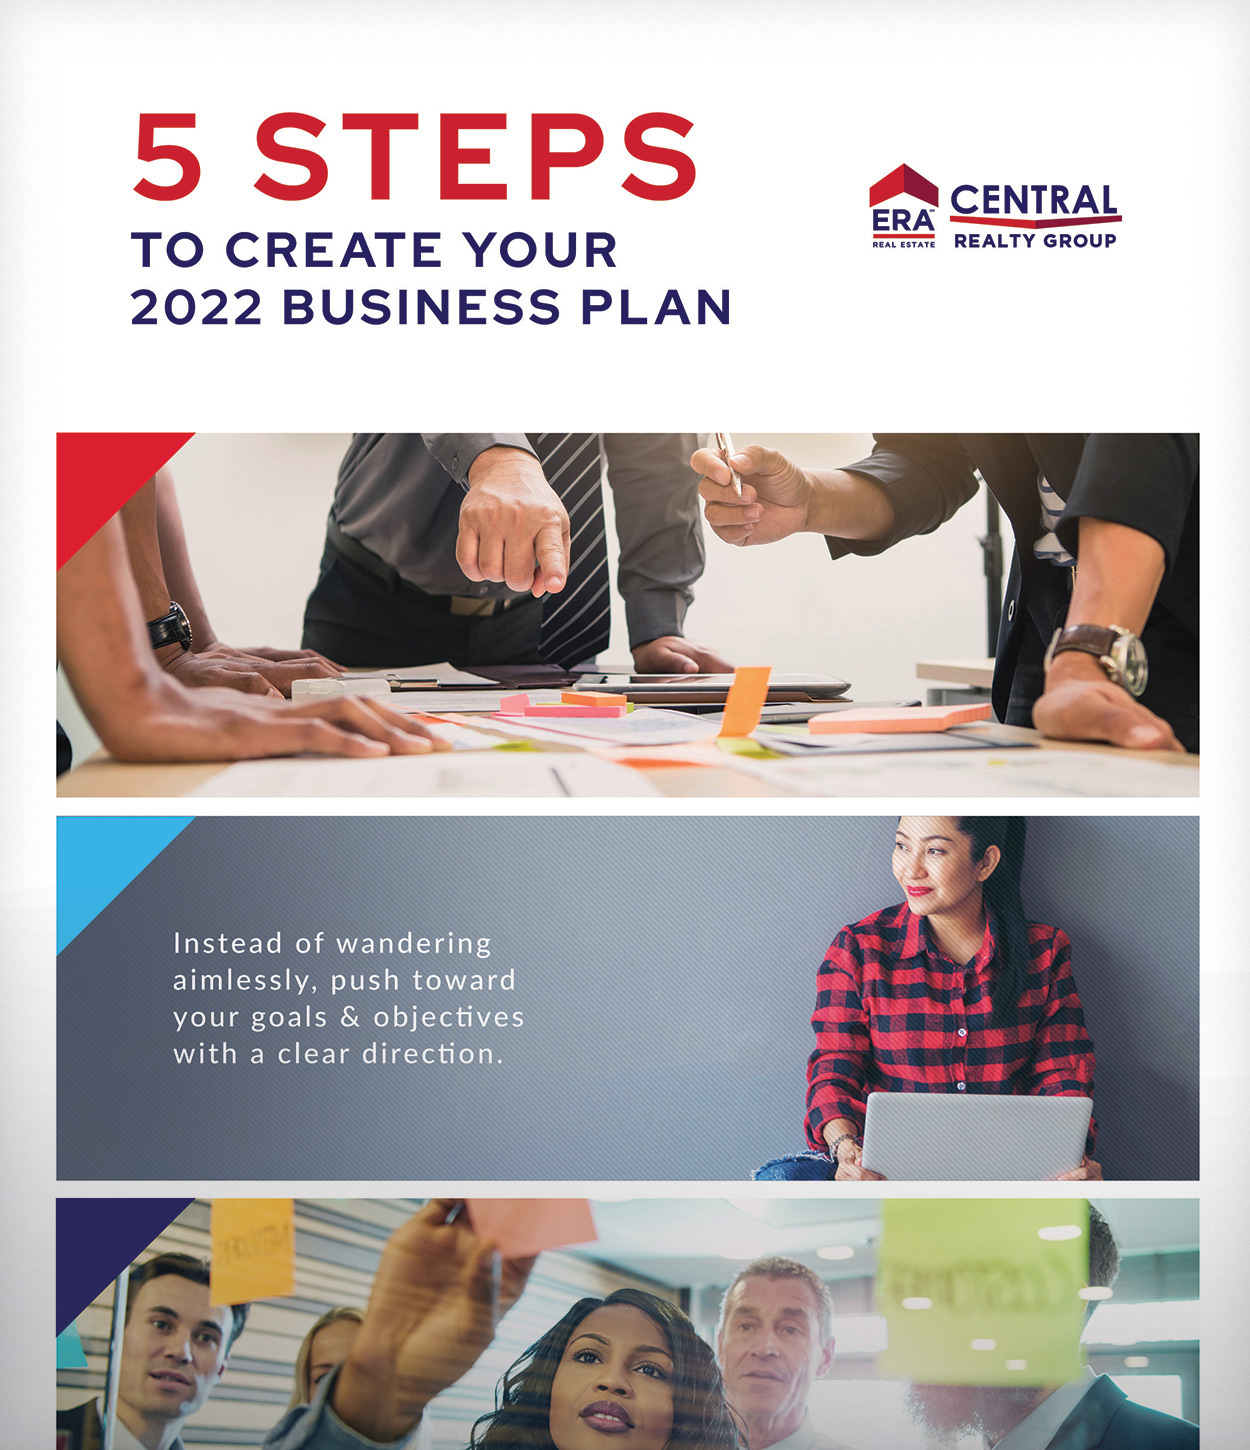 5 Steps to Create Your 2022 Business Plan